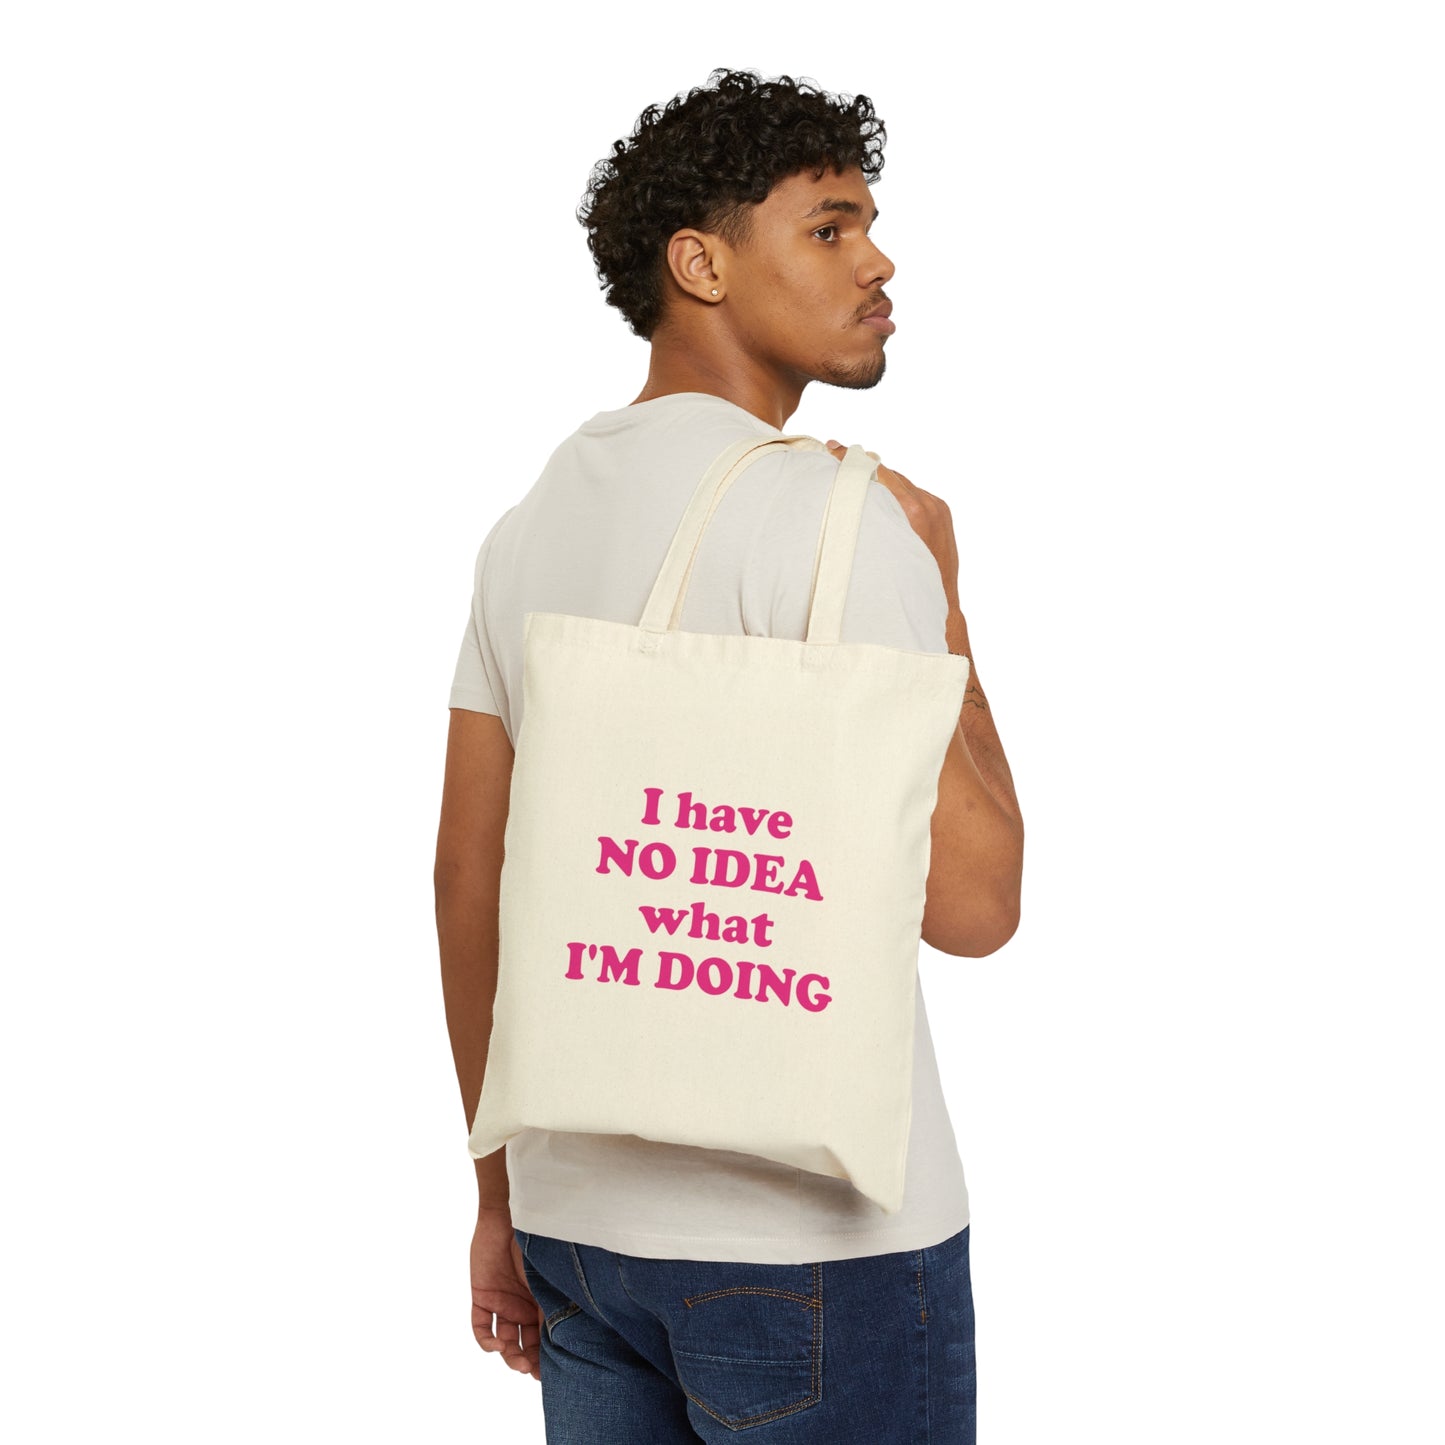 I Have No Idea What I'm Doing Funny Educational Quotes Canvas Shopping Cotton Tote Bag